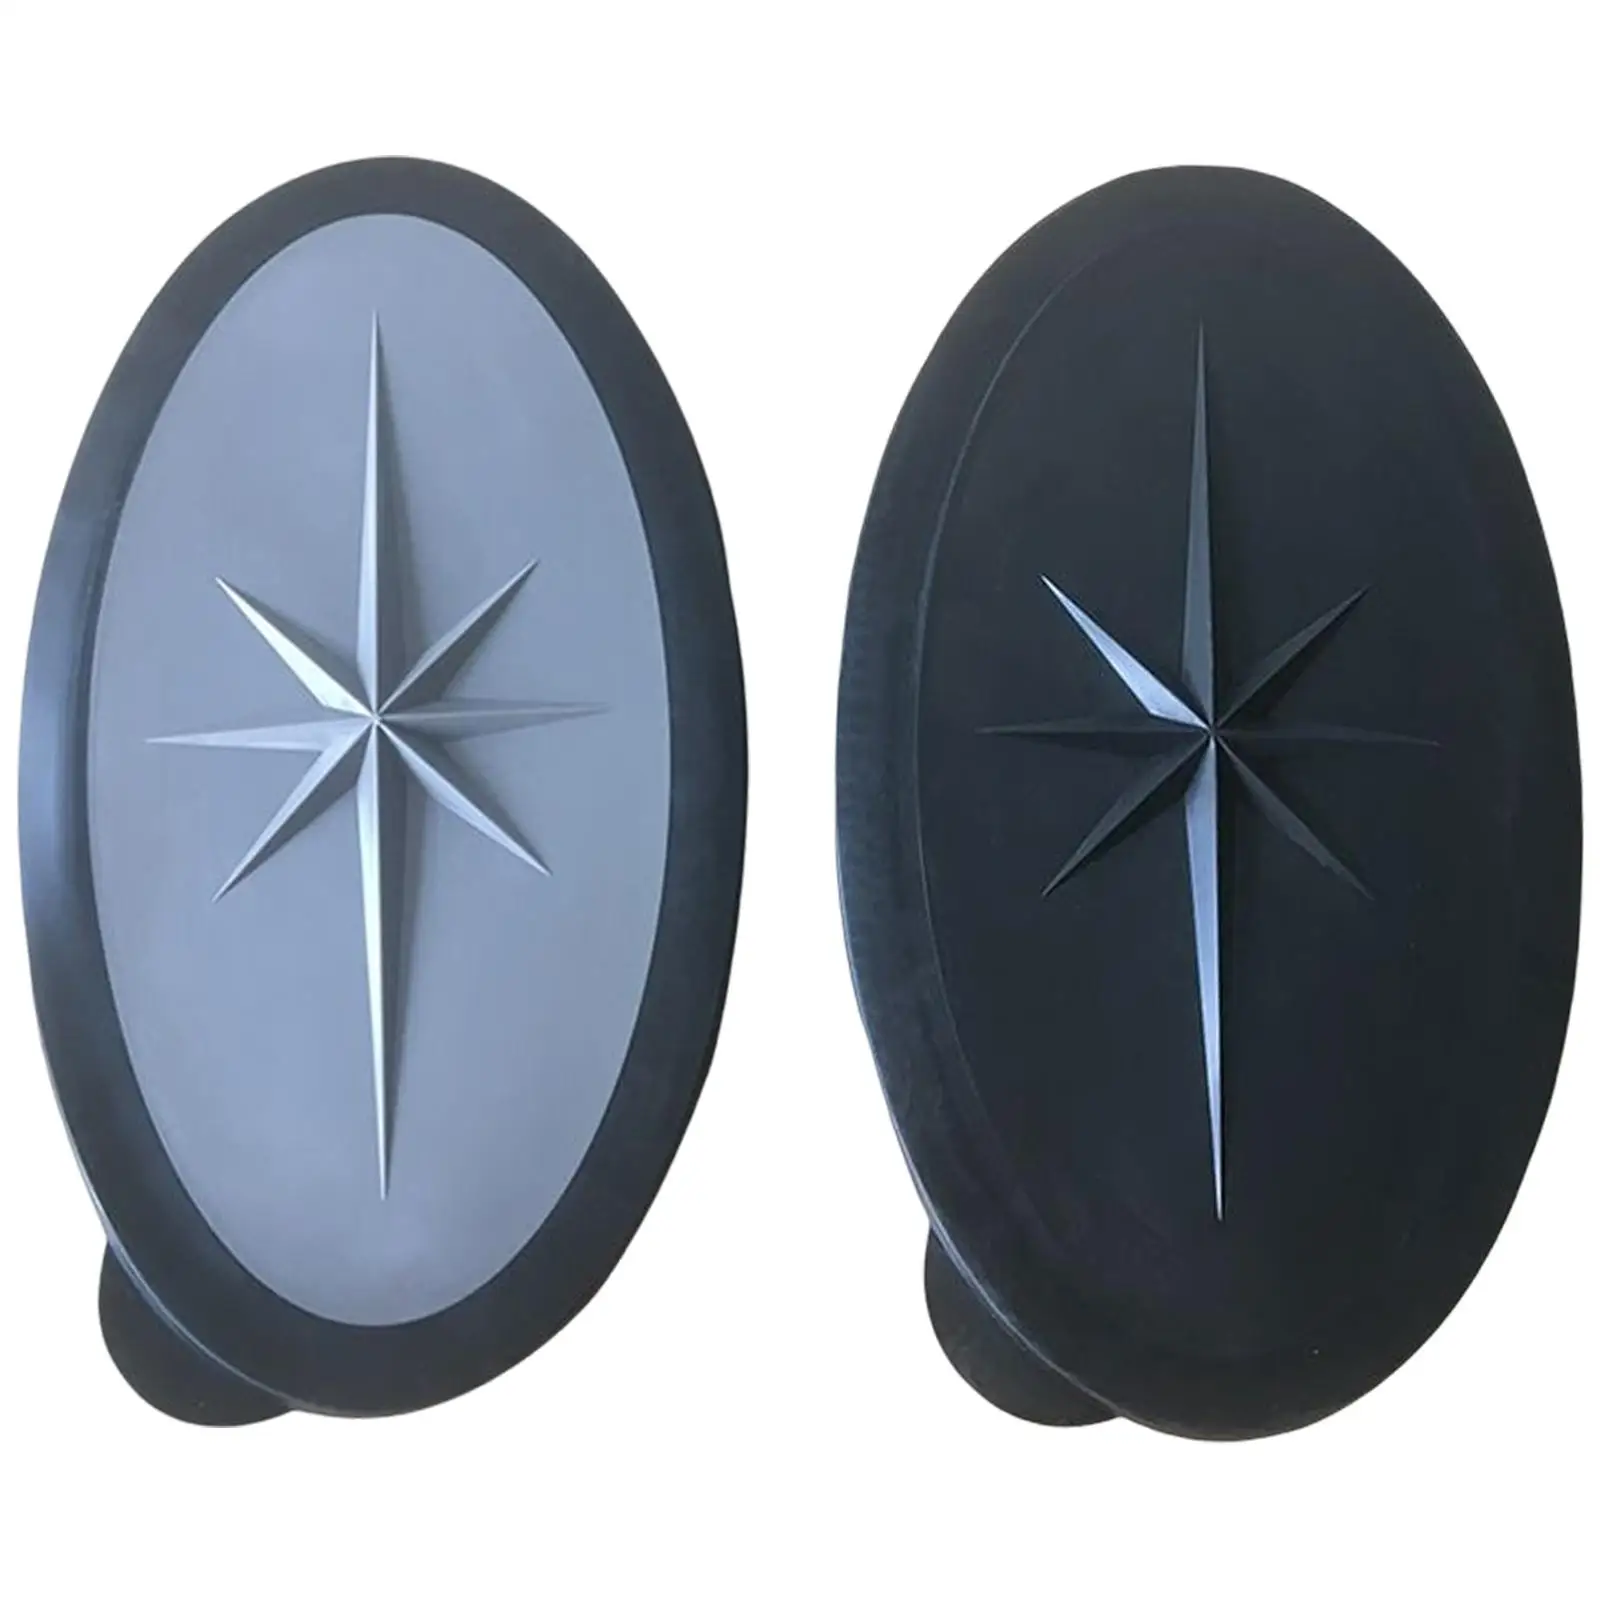 Oval Hatch Cover Waterproof Non-Slip ABS Access Kayak for Water Sport Yacht